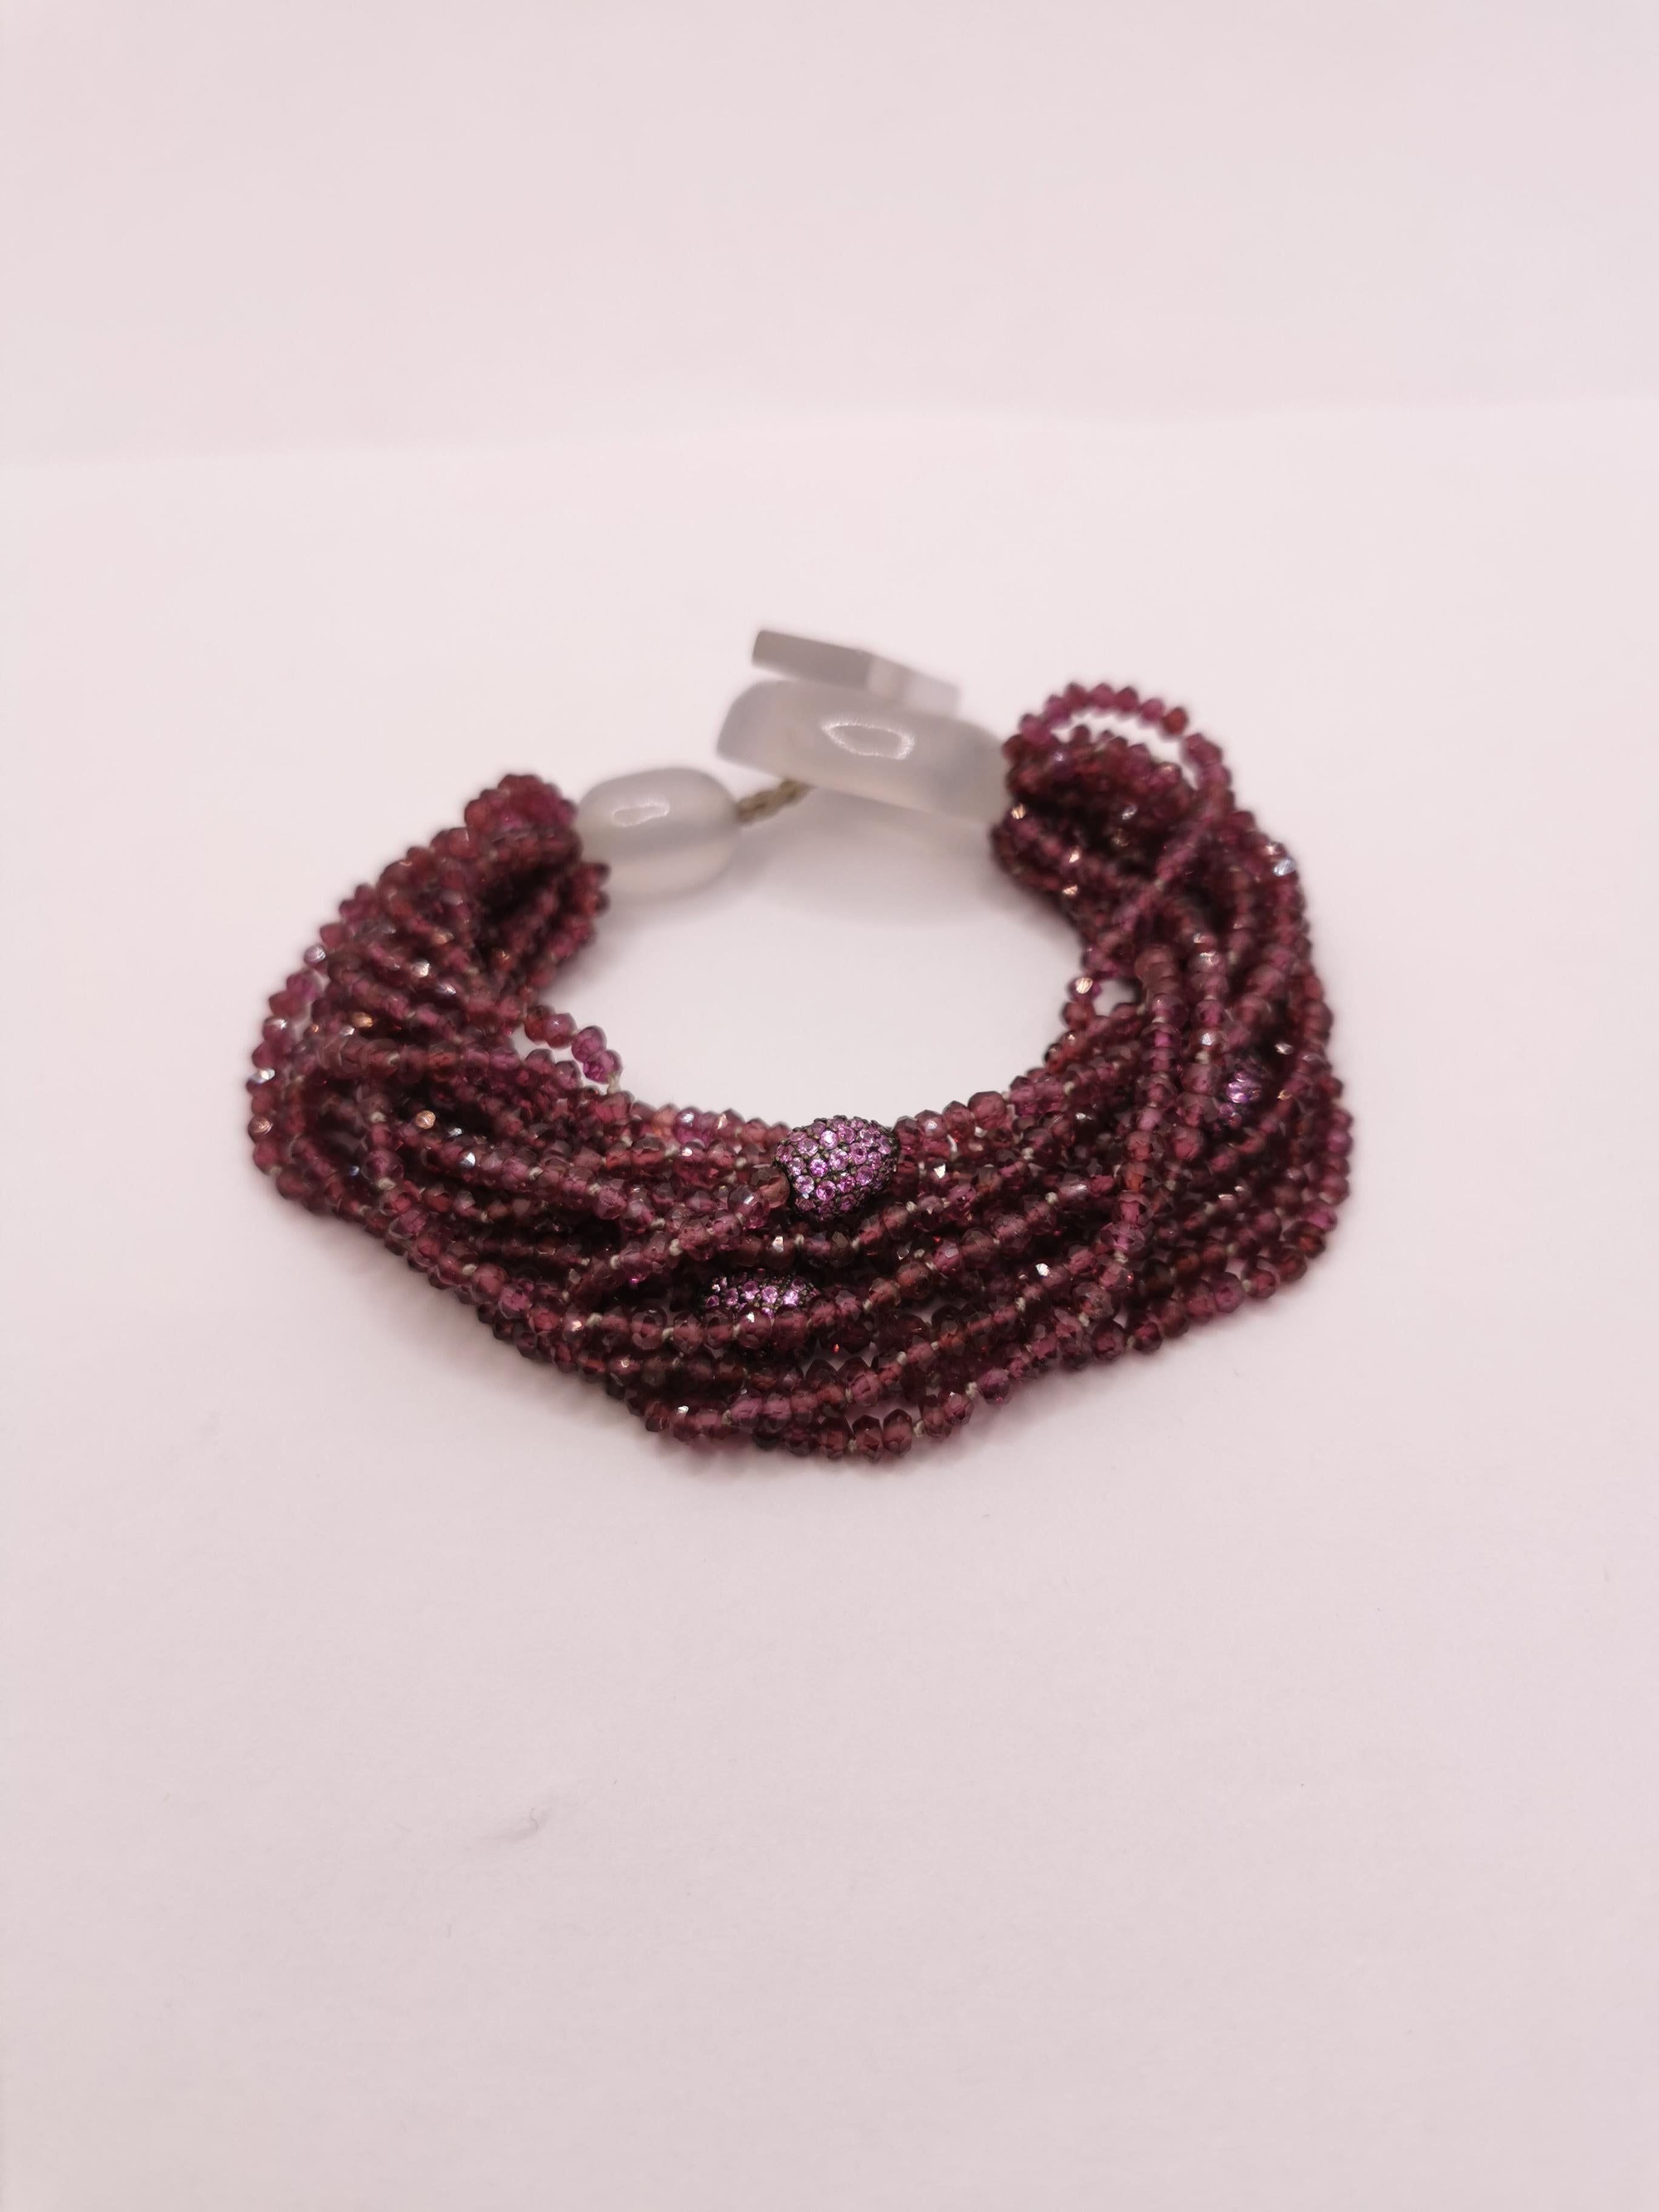 This is a beautiful bracelet made of few wires of briolet cut Rhodolite.

Among someone wires, are placed four oval elements embellished with Pink Sapphires that gives to the bracelet lightness and a touch of elegance.

The closure is made by two